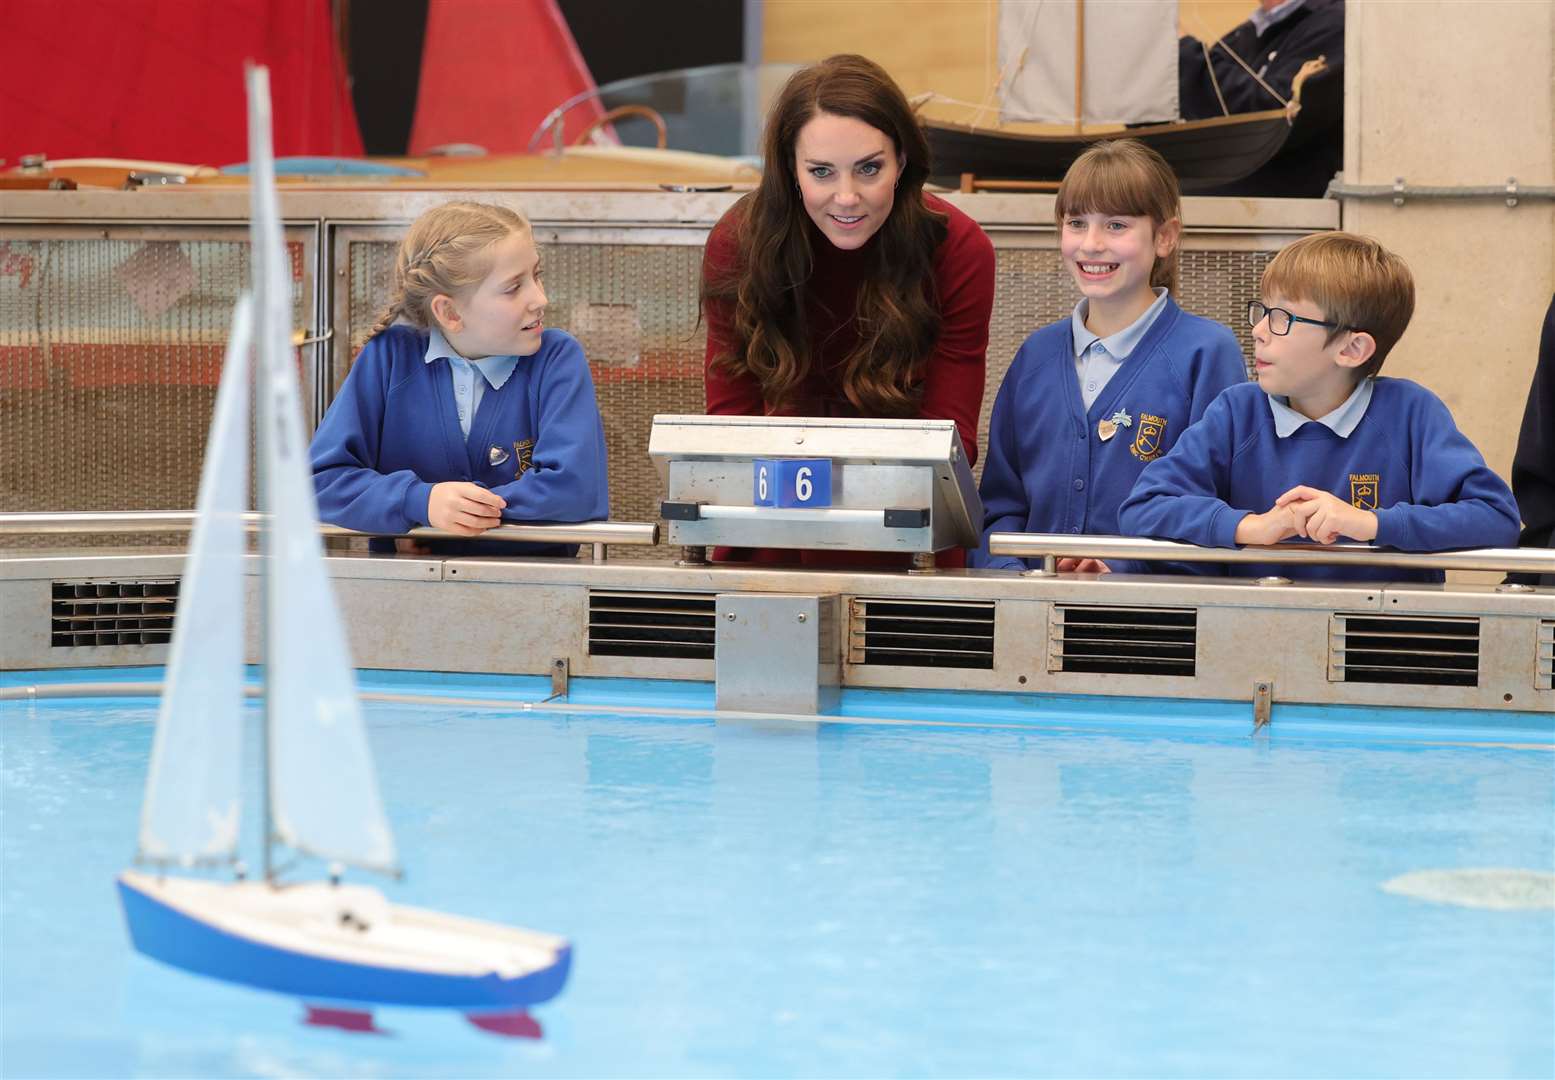 The Duchess of Cornwall and schoolchildren take part in a model boat race (Chris Jackson/PA)